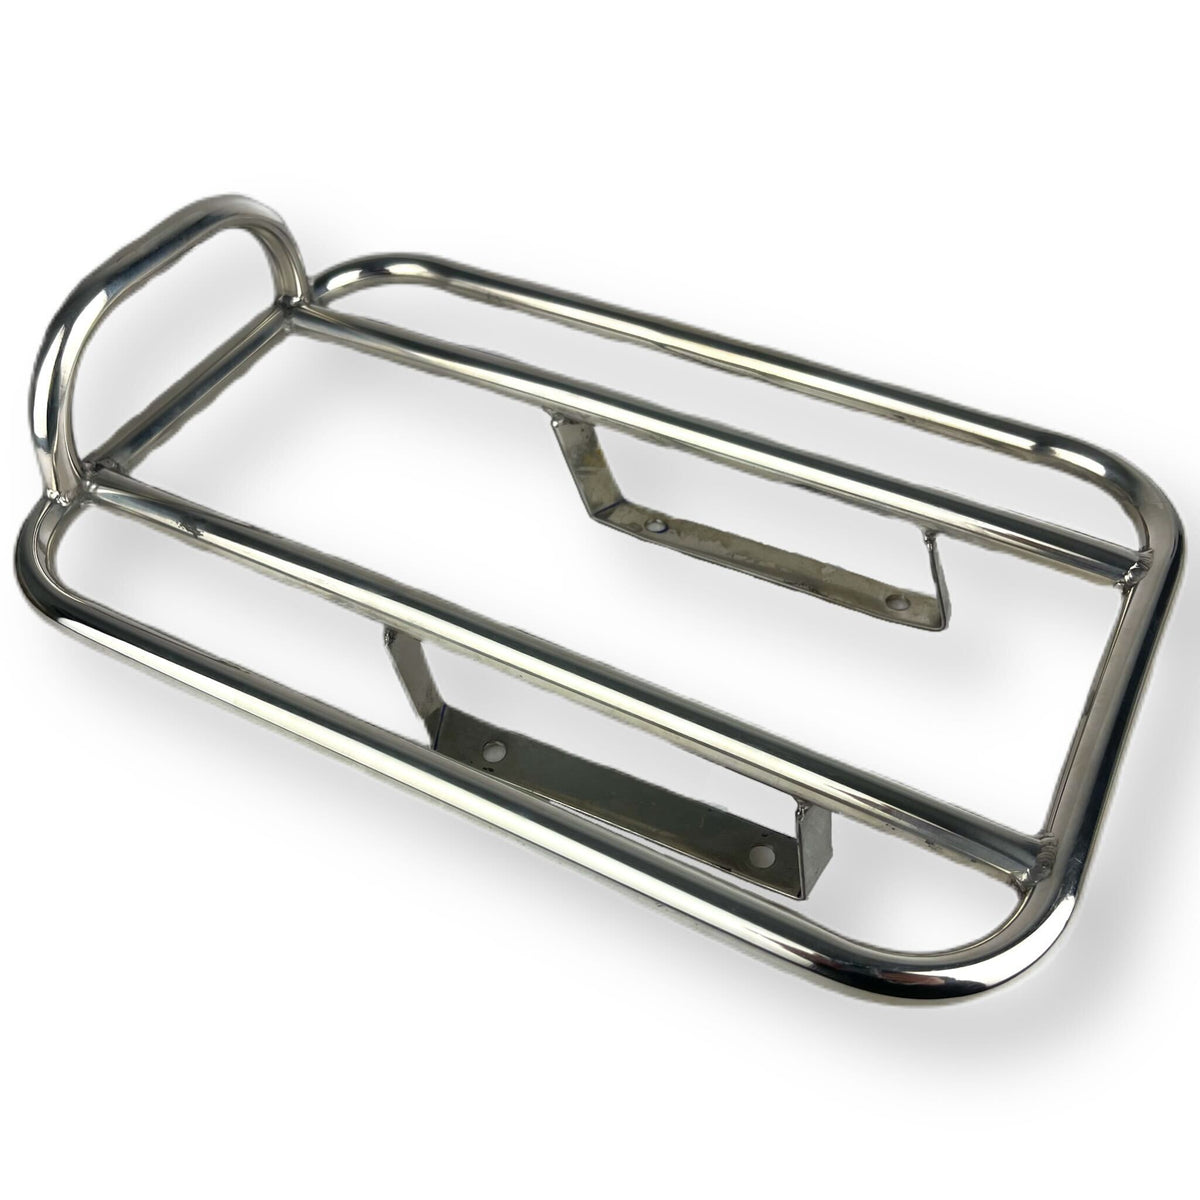 Scomadi Royal Alloy 60's Style Rear Sprint Rack - Polished Stainless Steel